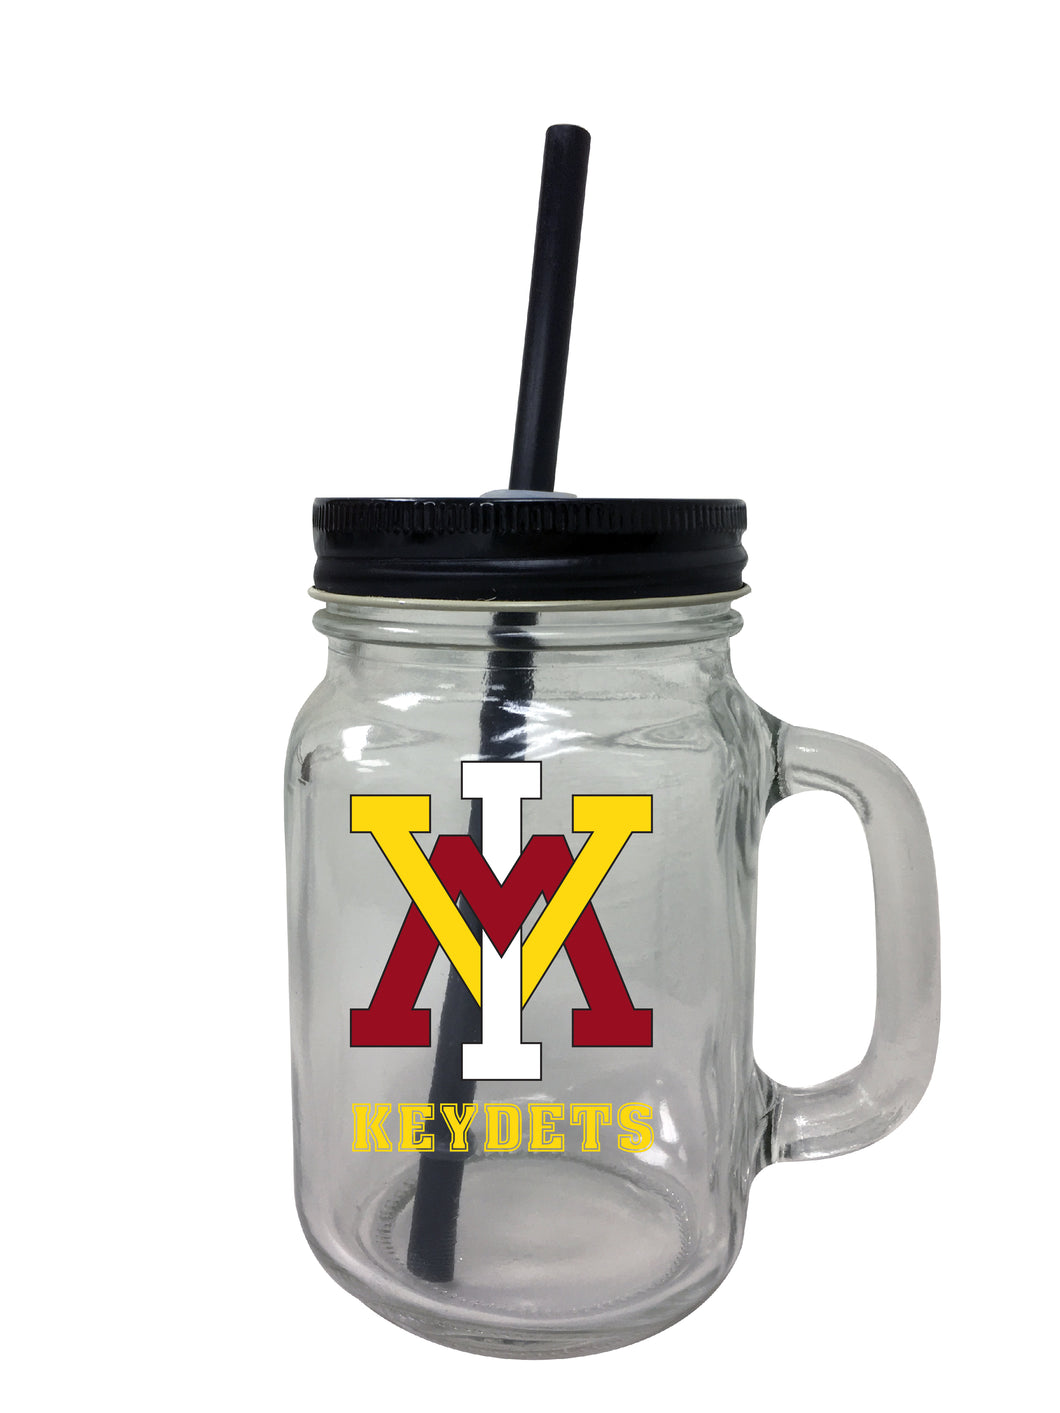 VMI Keydets NCAA Iconic Mason Jar Glass - Officially Licensed Collegiate Drinkware with Lid and Straw 2-Pack